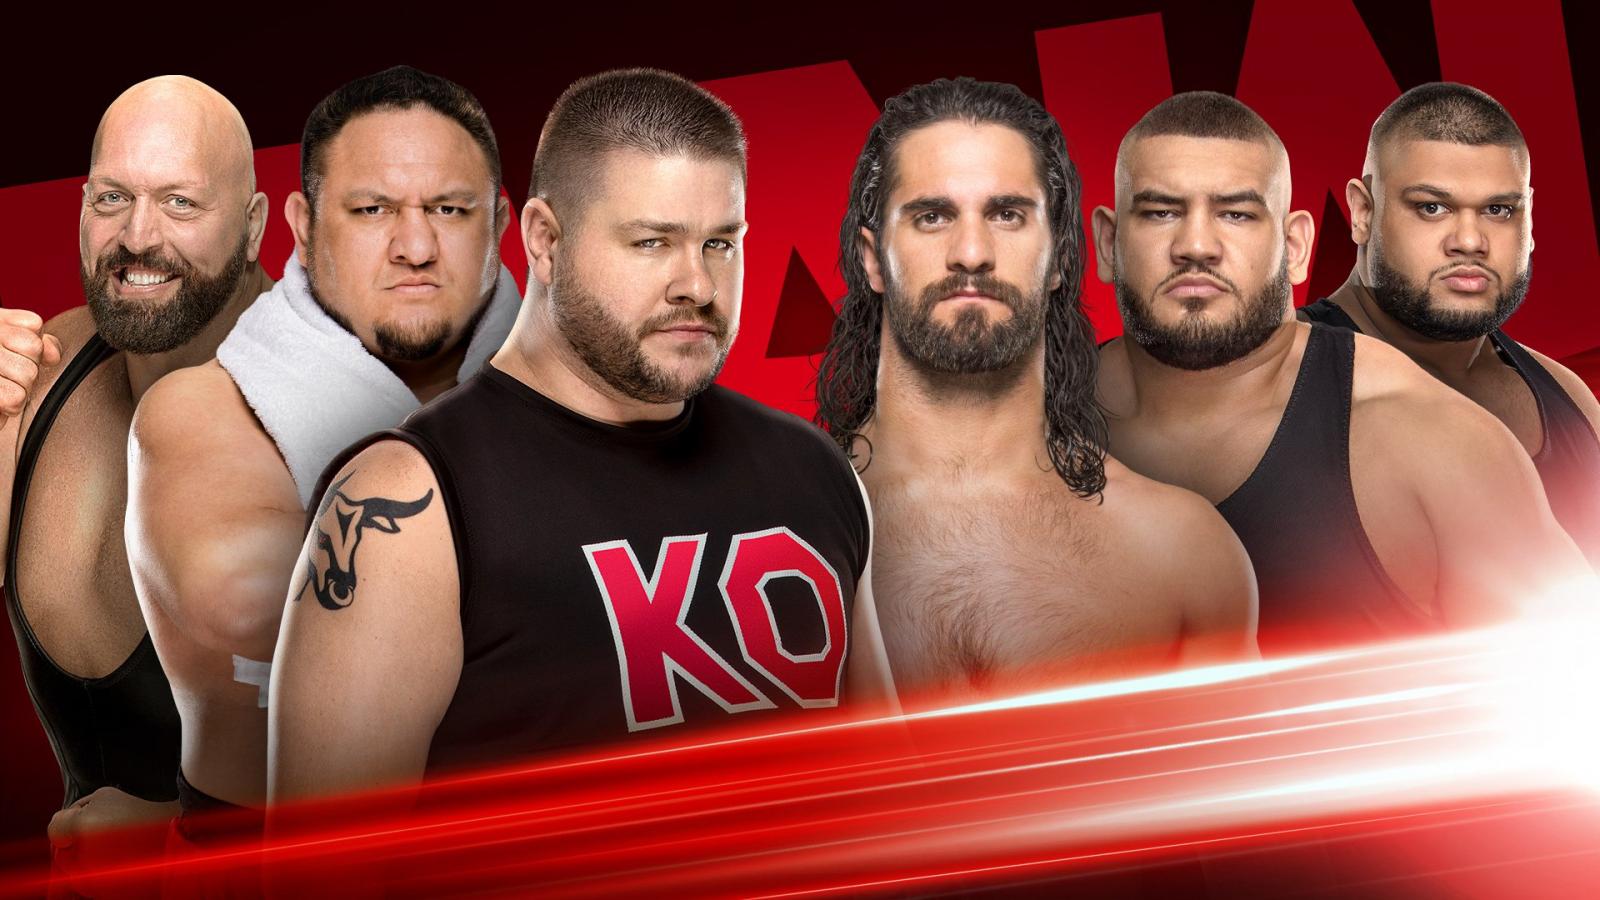 Rules Revealed For ‘Fist Fight’ On WWE RAW